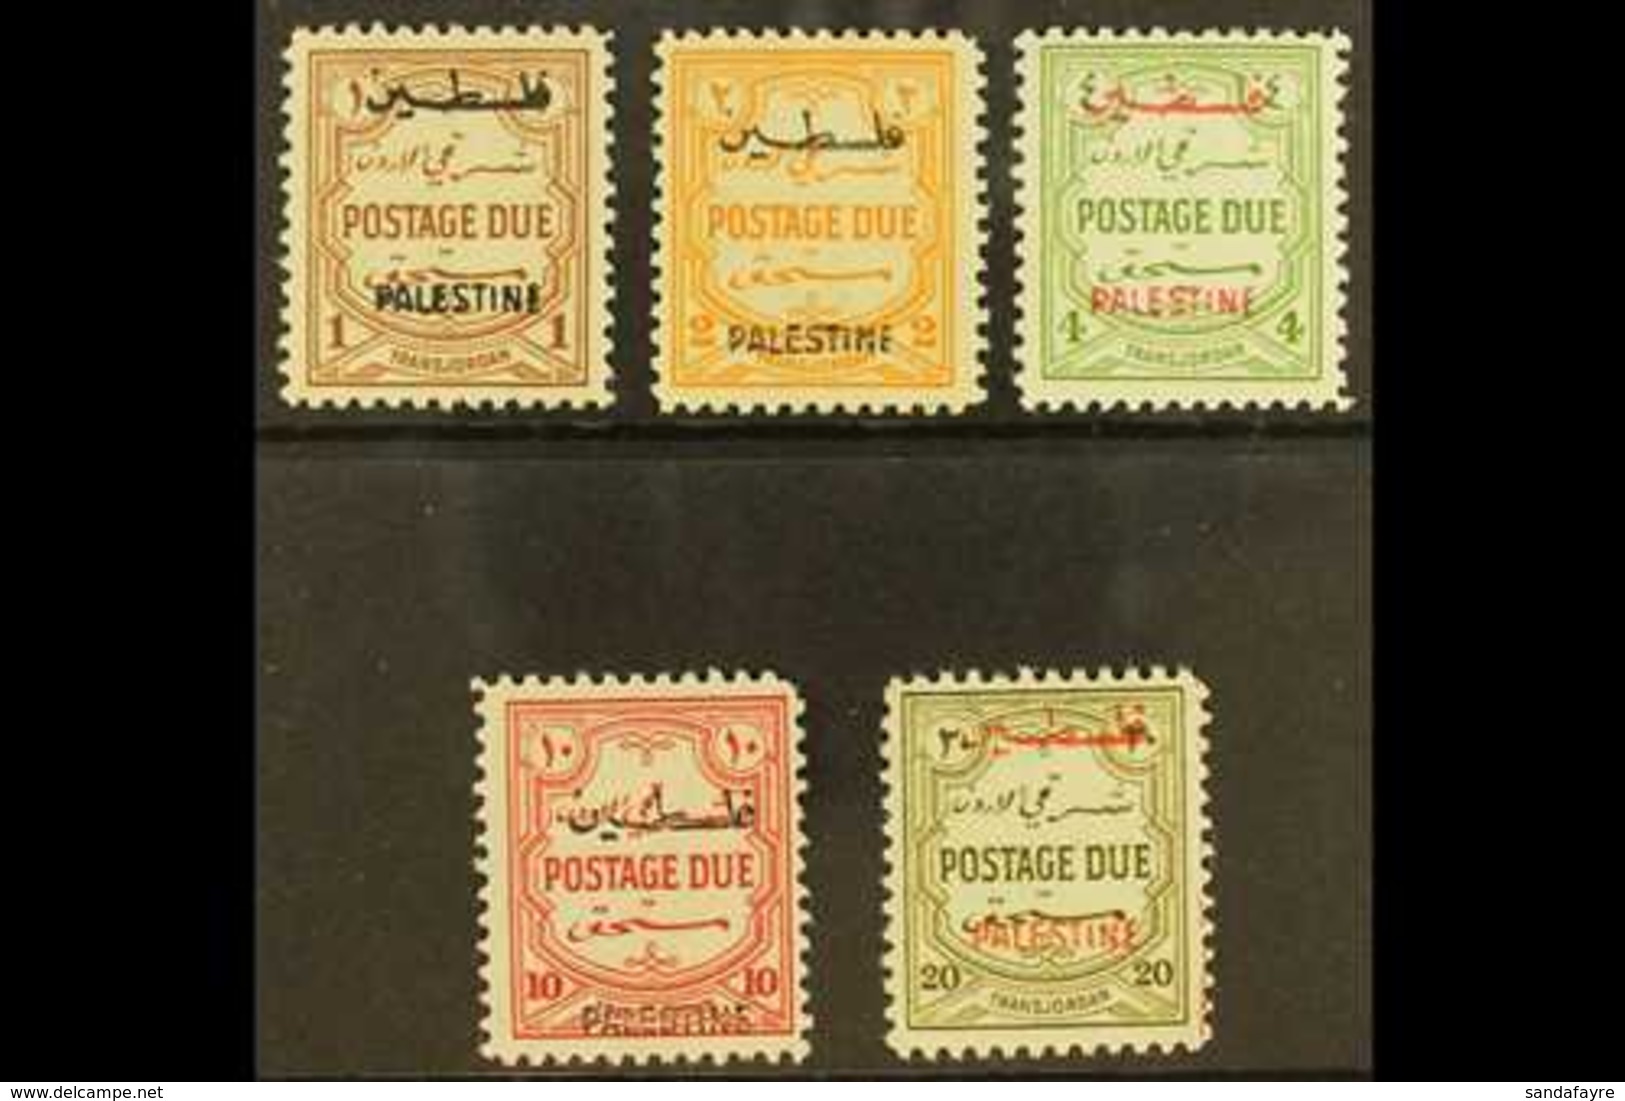 OCCUPATION OF PALESTINE  1948 Postage Due Set, Perf 12, Complete, SG PD25/9, Very Fine And Fresh Mint. (5 Stamps) For Mo - Jordanie